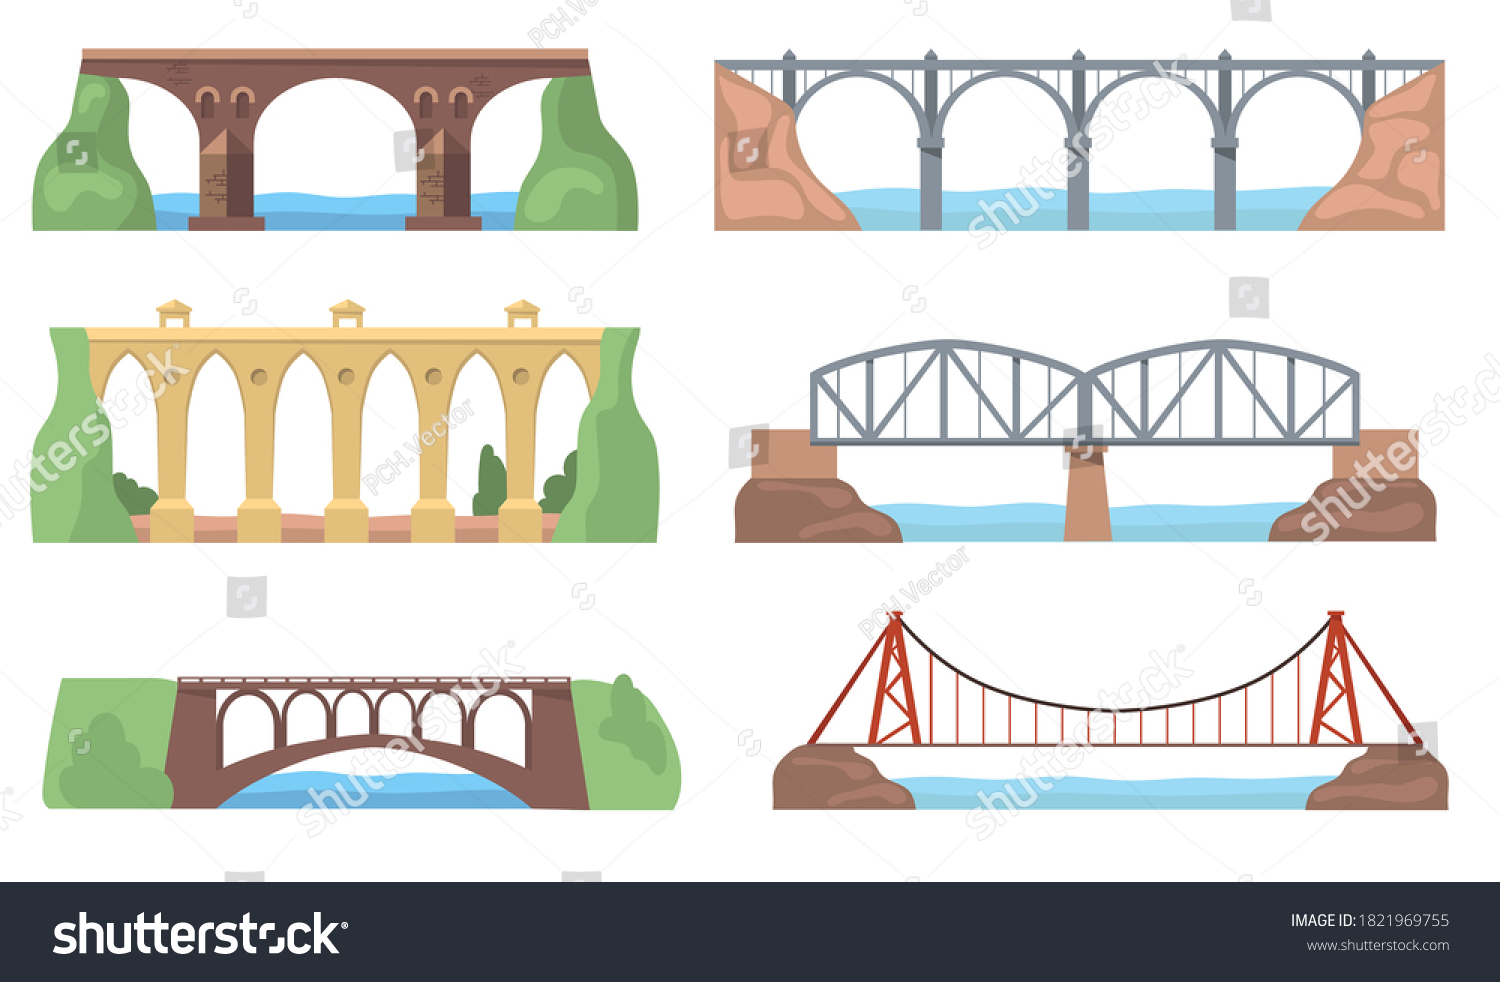 SVG of Scenic views with bridges set. Arch constructions, aqueducts, rivers, cliffs, landscapes isolated on white background. Flat vector illustrations for architecture, landmark, transportation concept svg